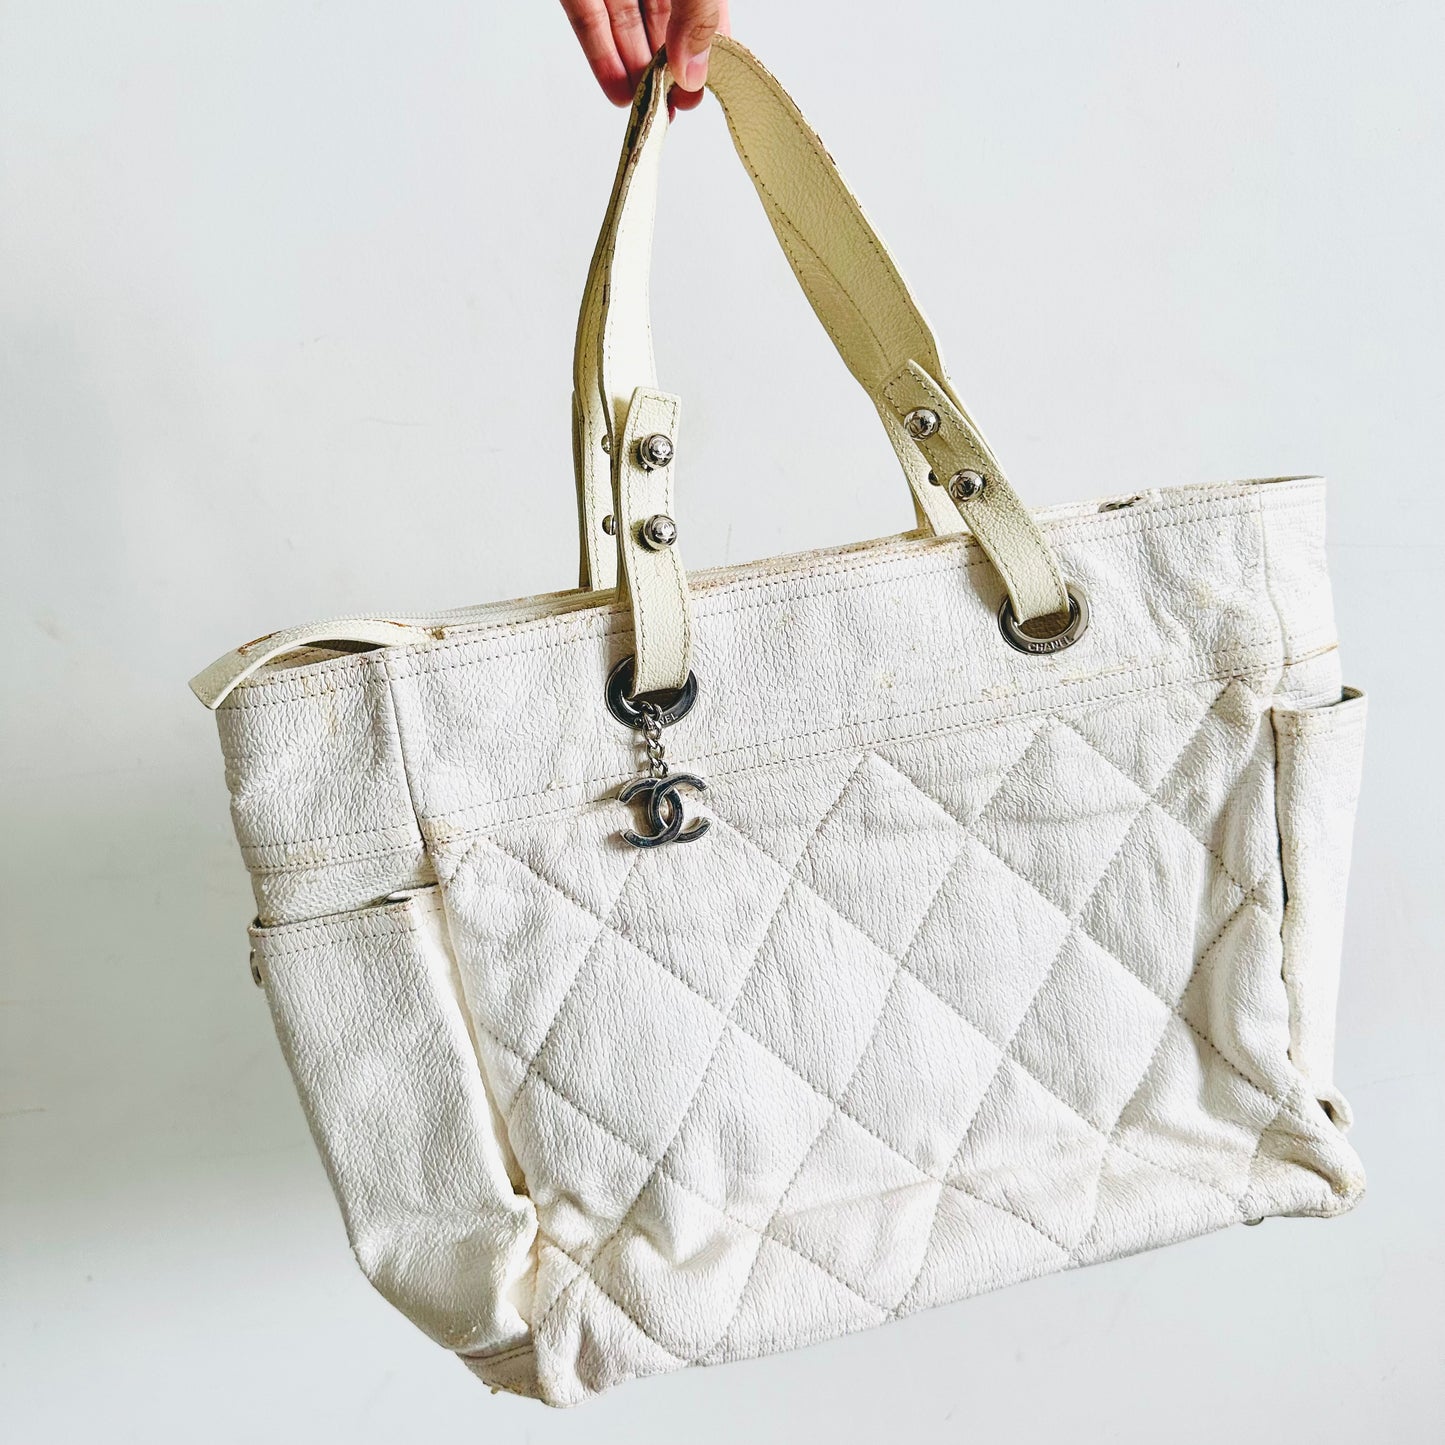 Chanel White Paris Biarritz CC Monogram Logo Quilted Coated Fabric & Leather Shopper Shoulder Tote Bag With Pockets 12s